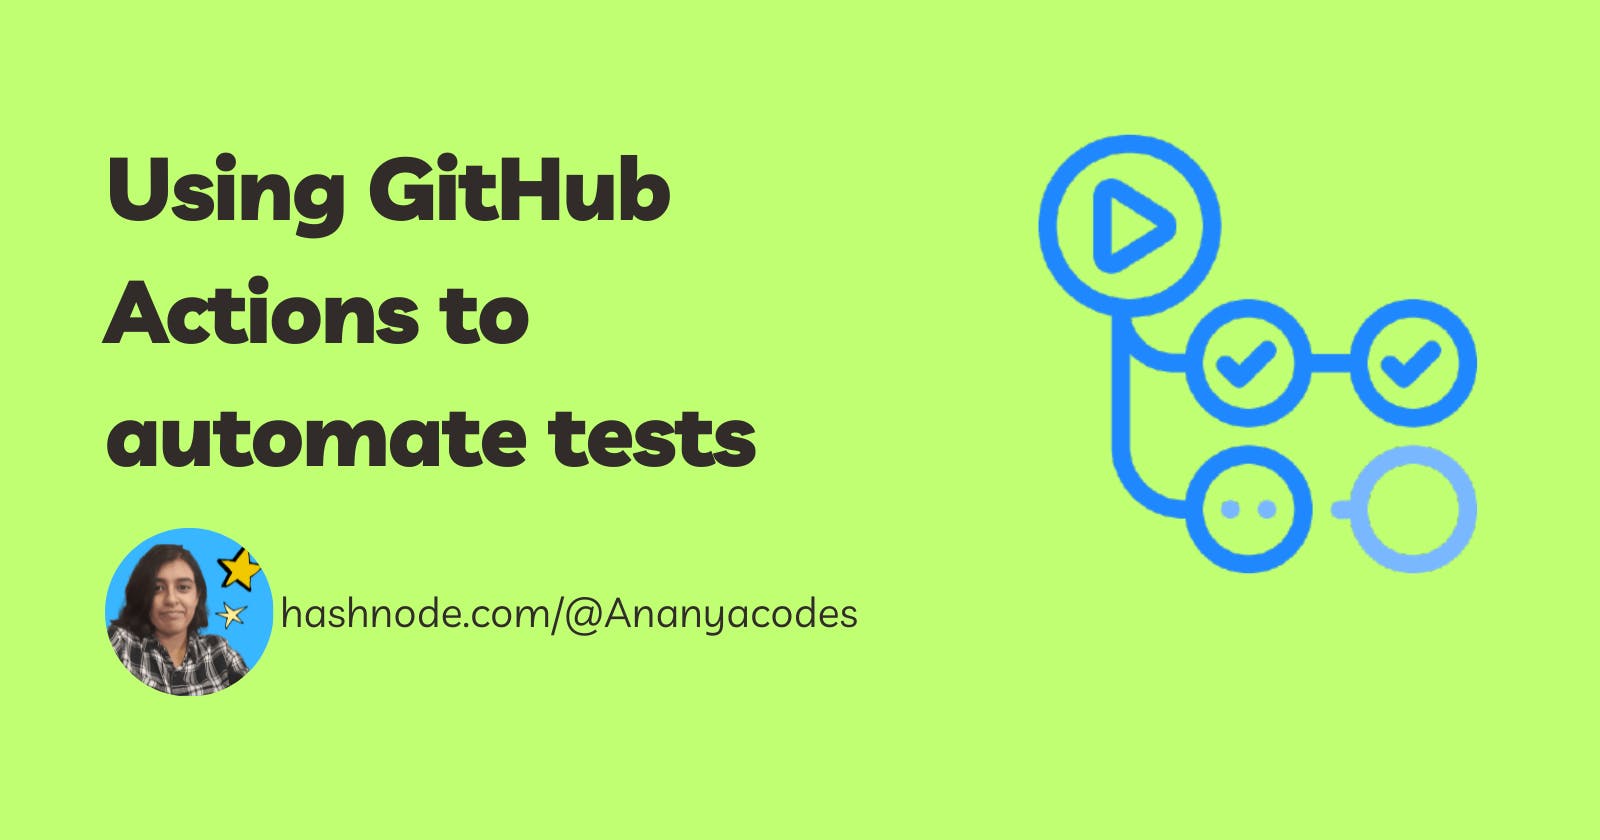 Using GitHub Actions to automate tests